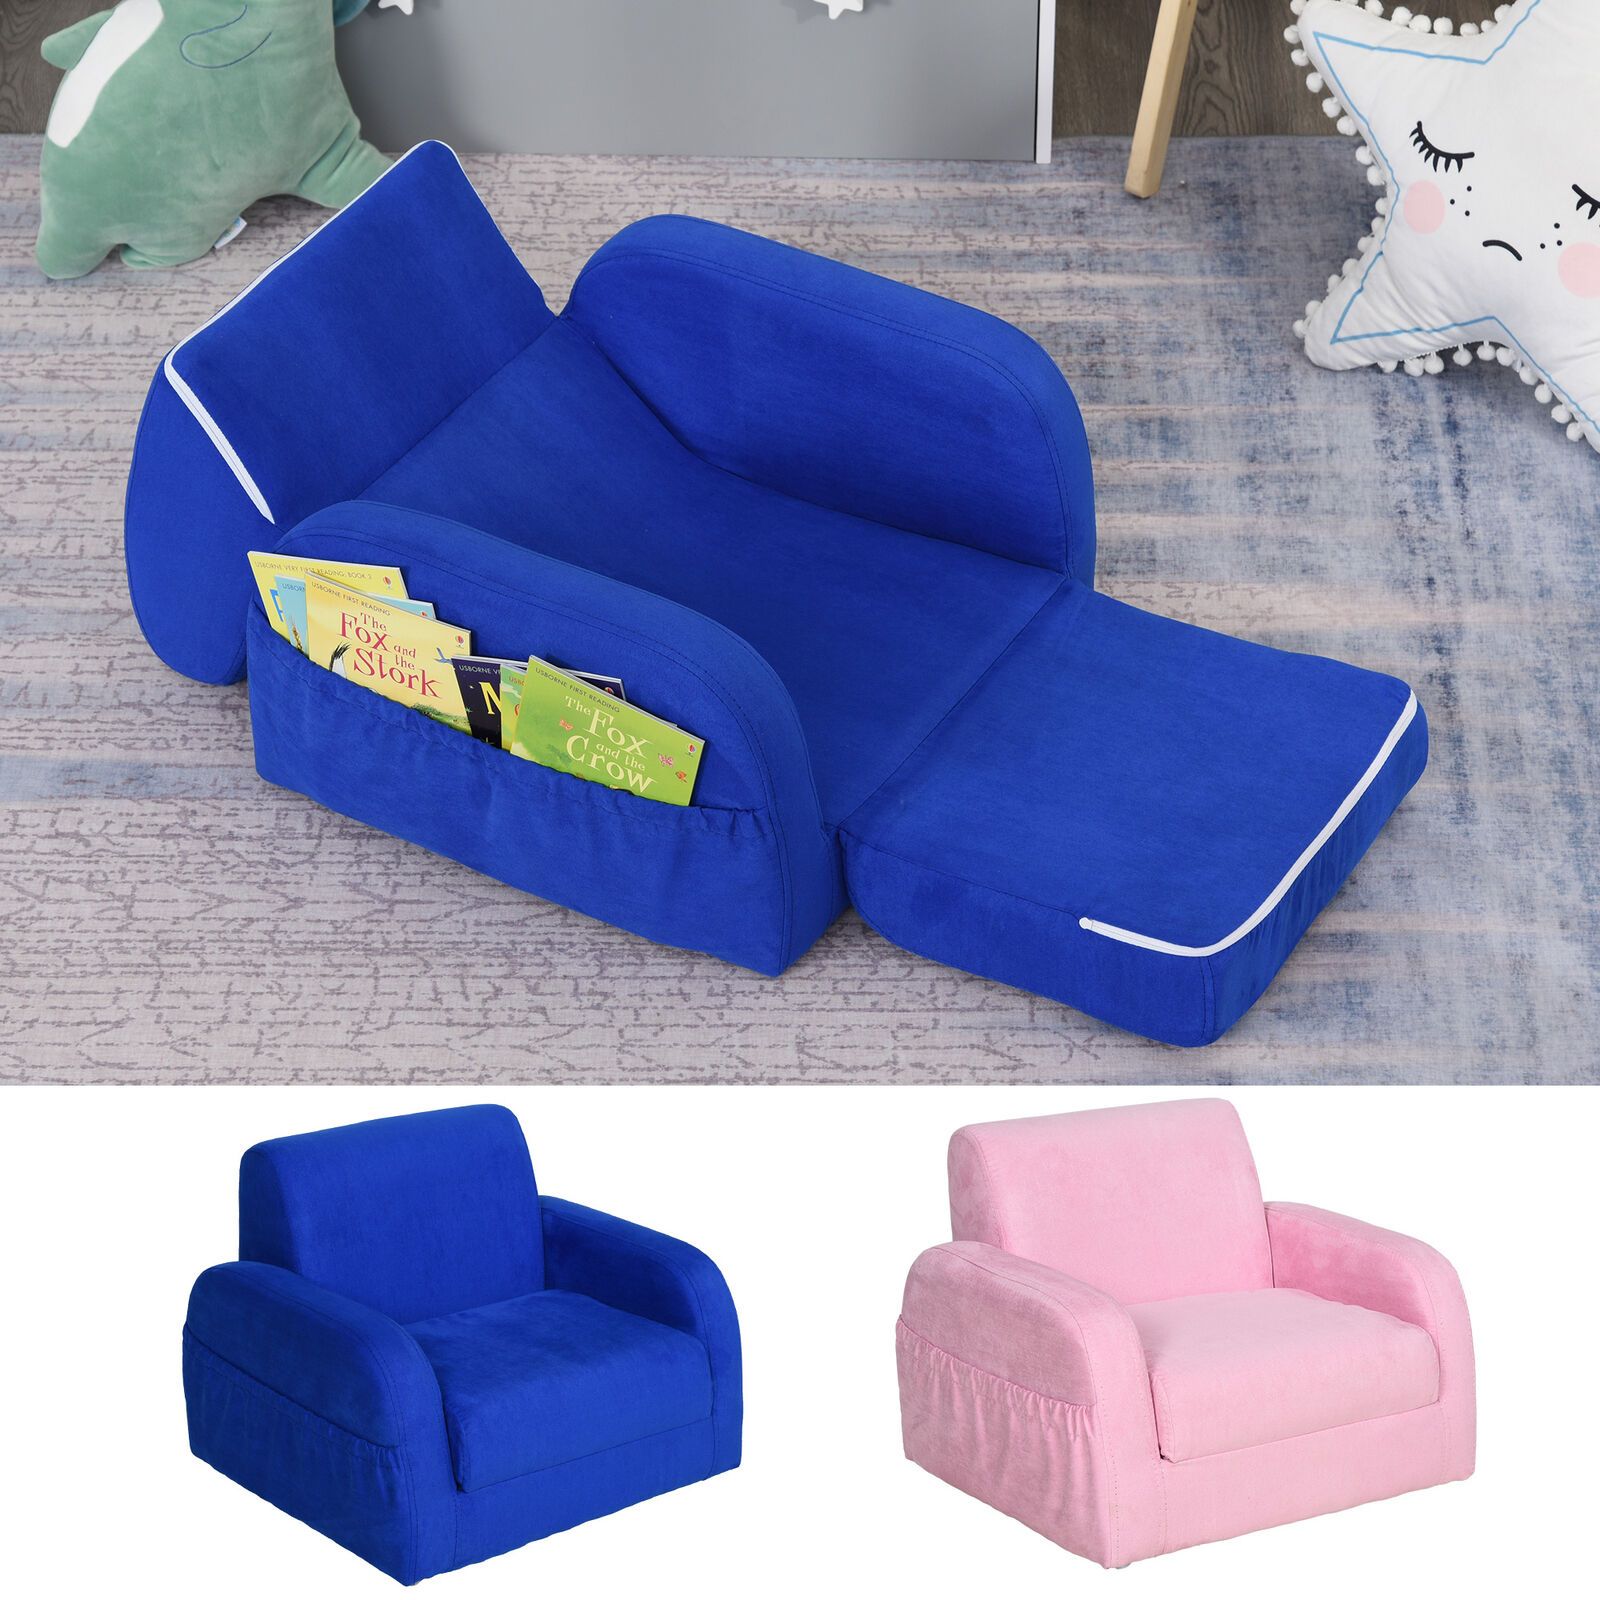 2 In 1 Kids Armchair Sofa Bed Fold Out Padded Toddler Furniture For 3 4  Years | Ebay Throughout Children's Sofa Beds (Photo 1 of 15)